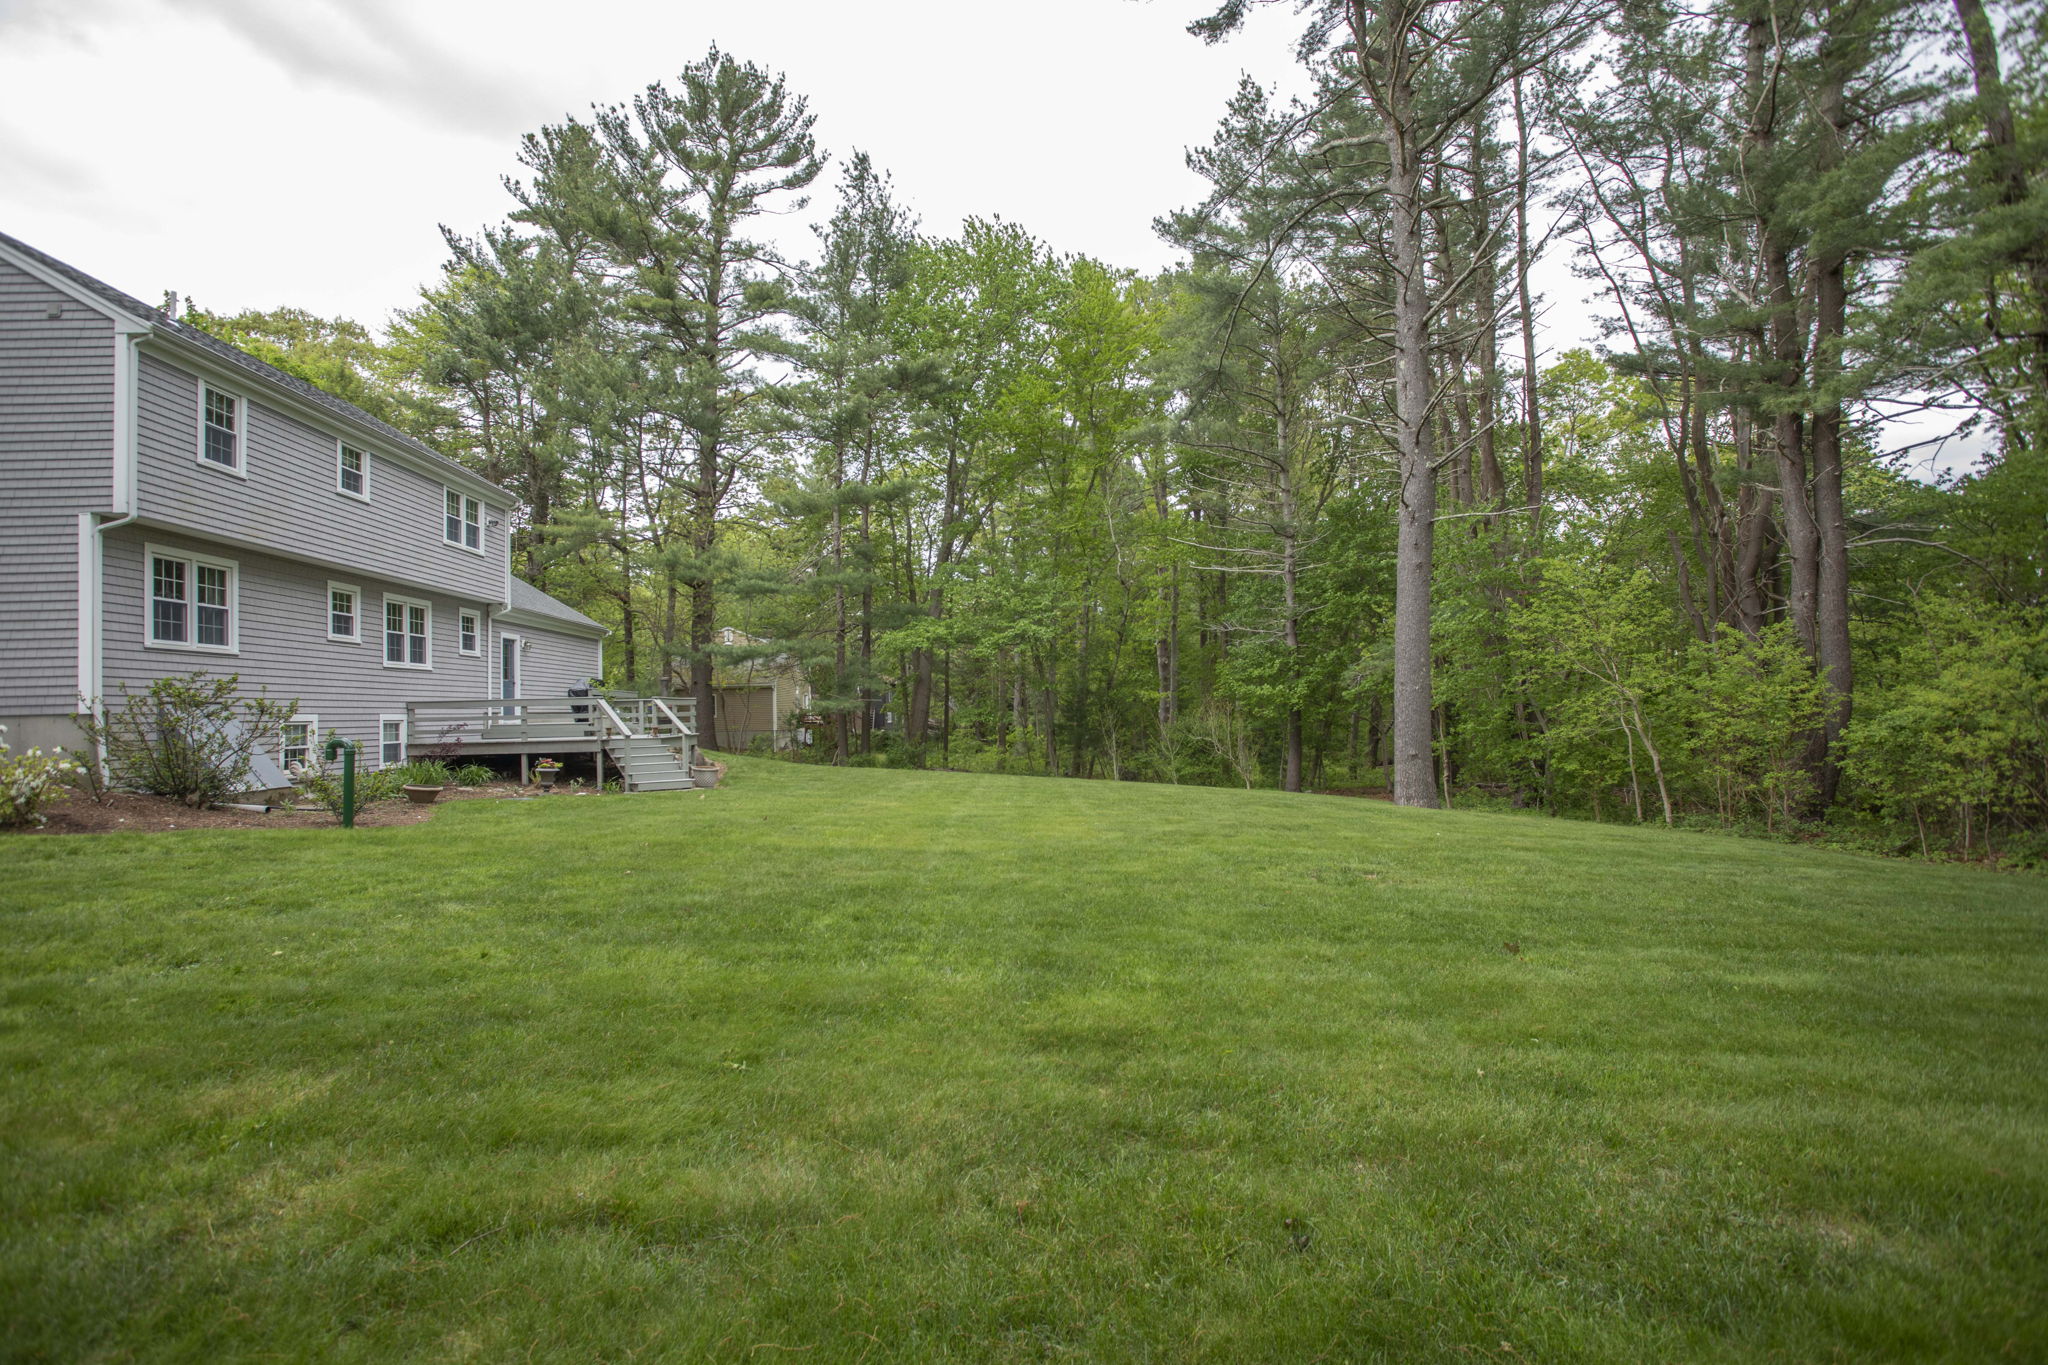  22 Heritage Hill Dr, Lakeville, MA 02347, US Photo 13